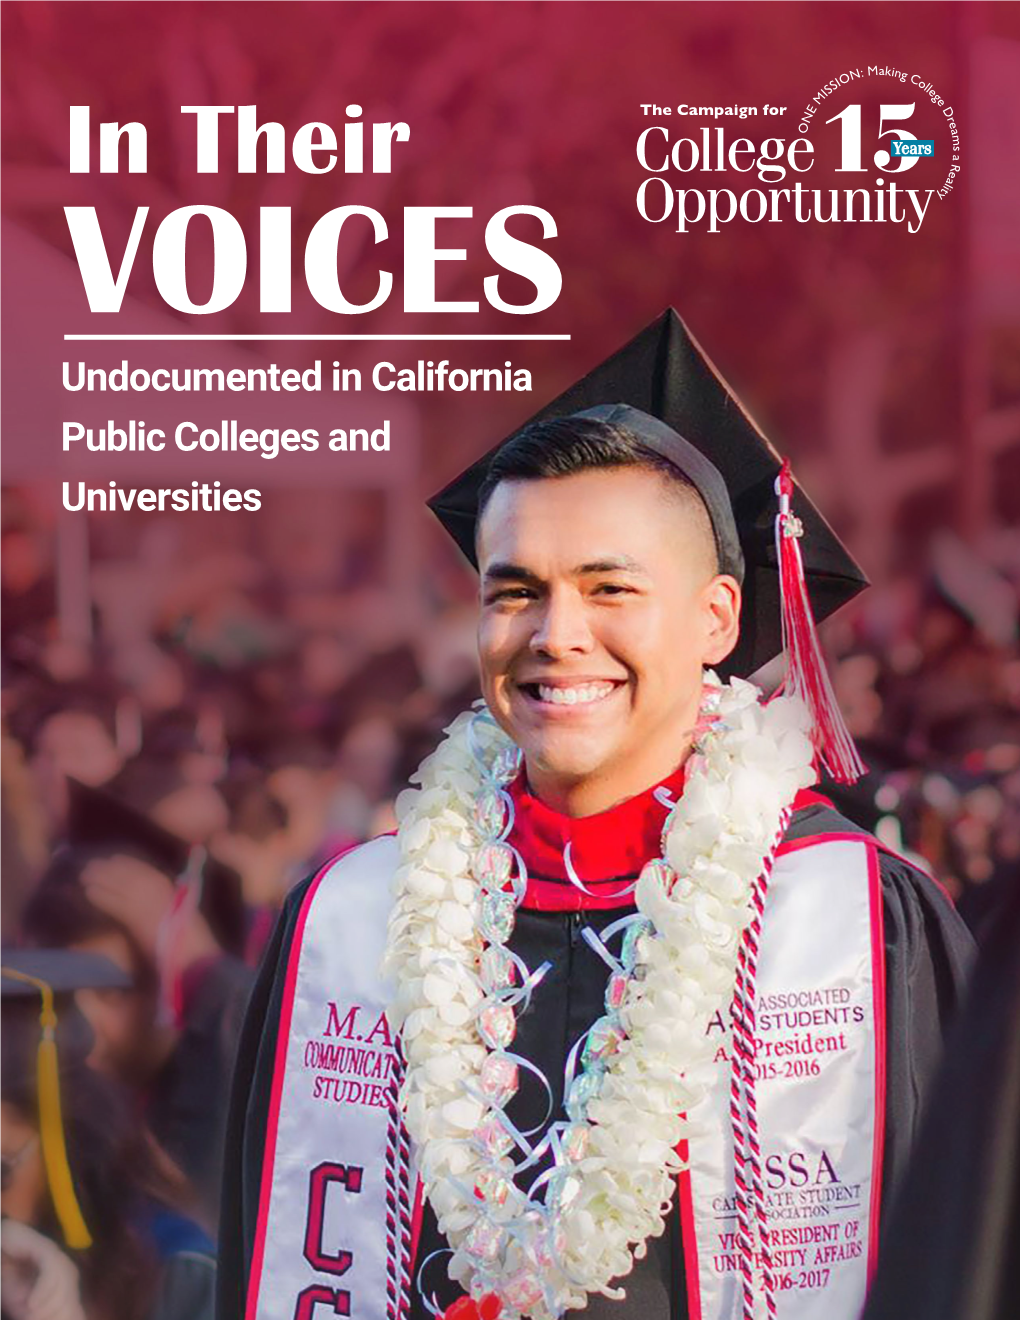 In Their VOICES Undocumented in California Public Colleges and Universities INTRODUCTION